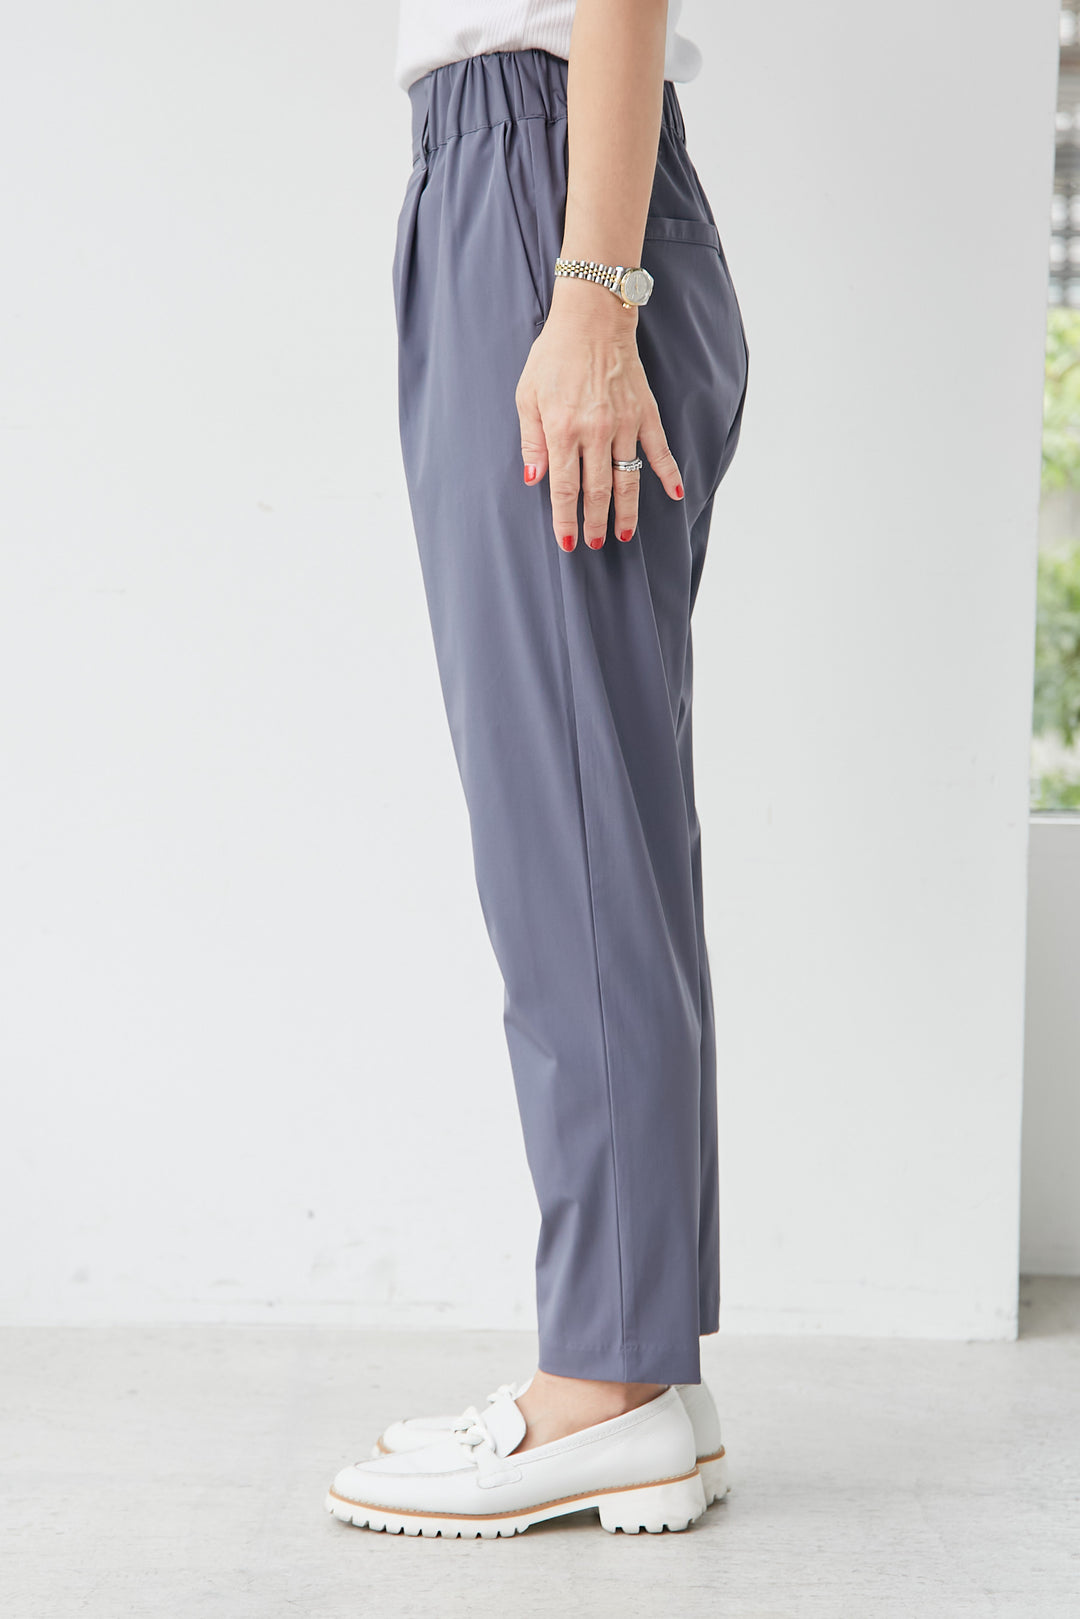 [SET] Cocoon Silhouette T+ [Cool to the touch/UV protection] Tapered pants (2 sets)